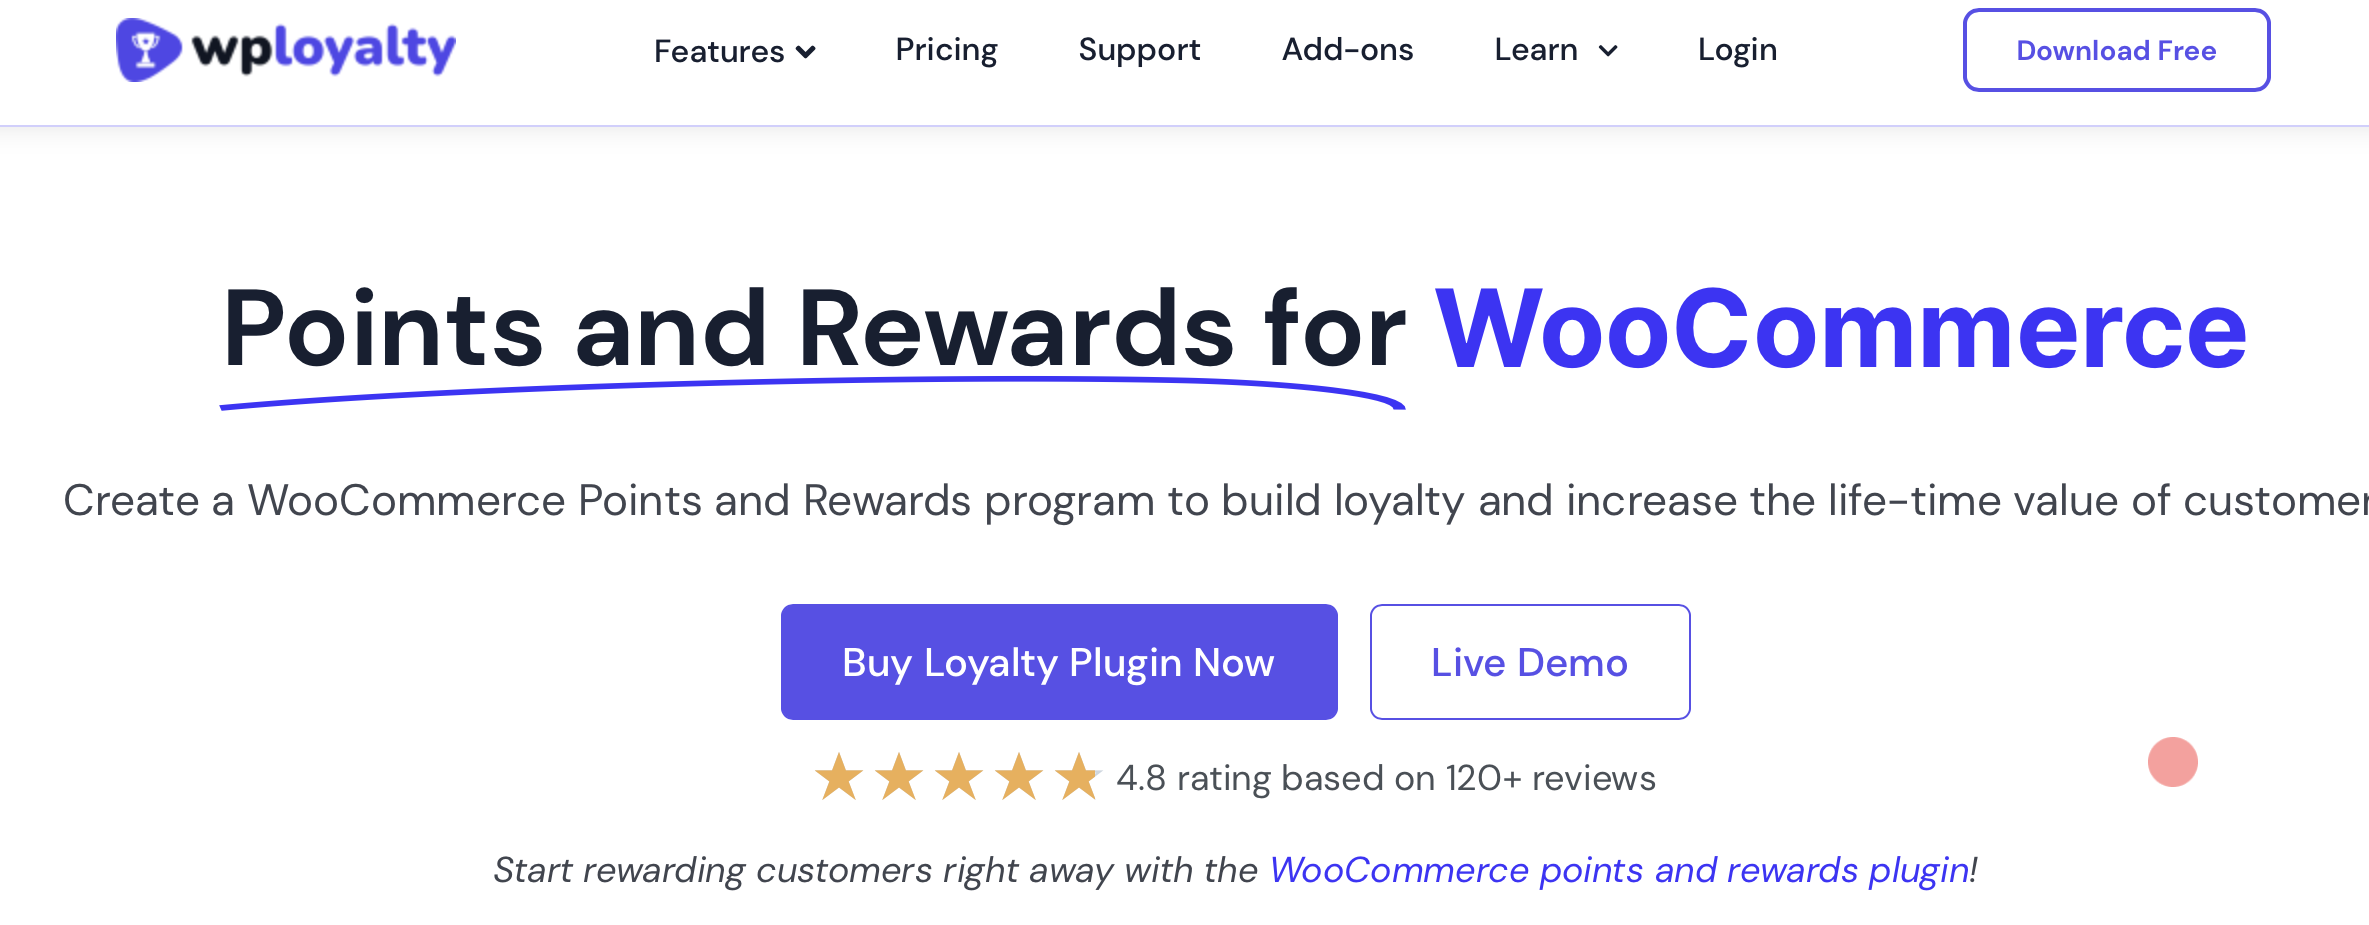 WP Loyalty is a great plugin to use for creating a loyalty program.